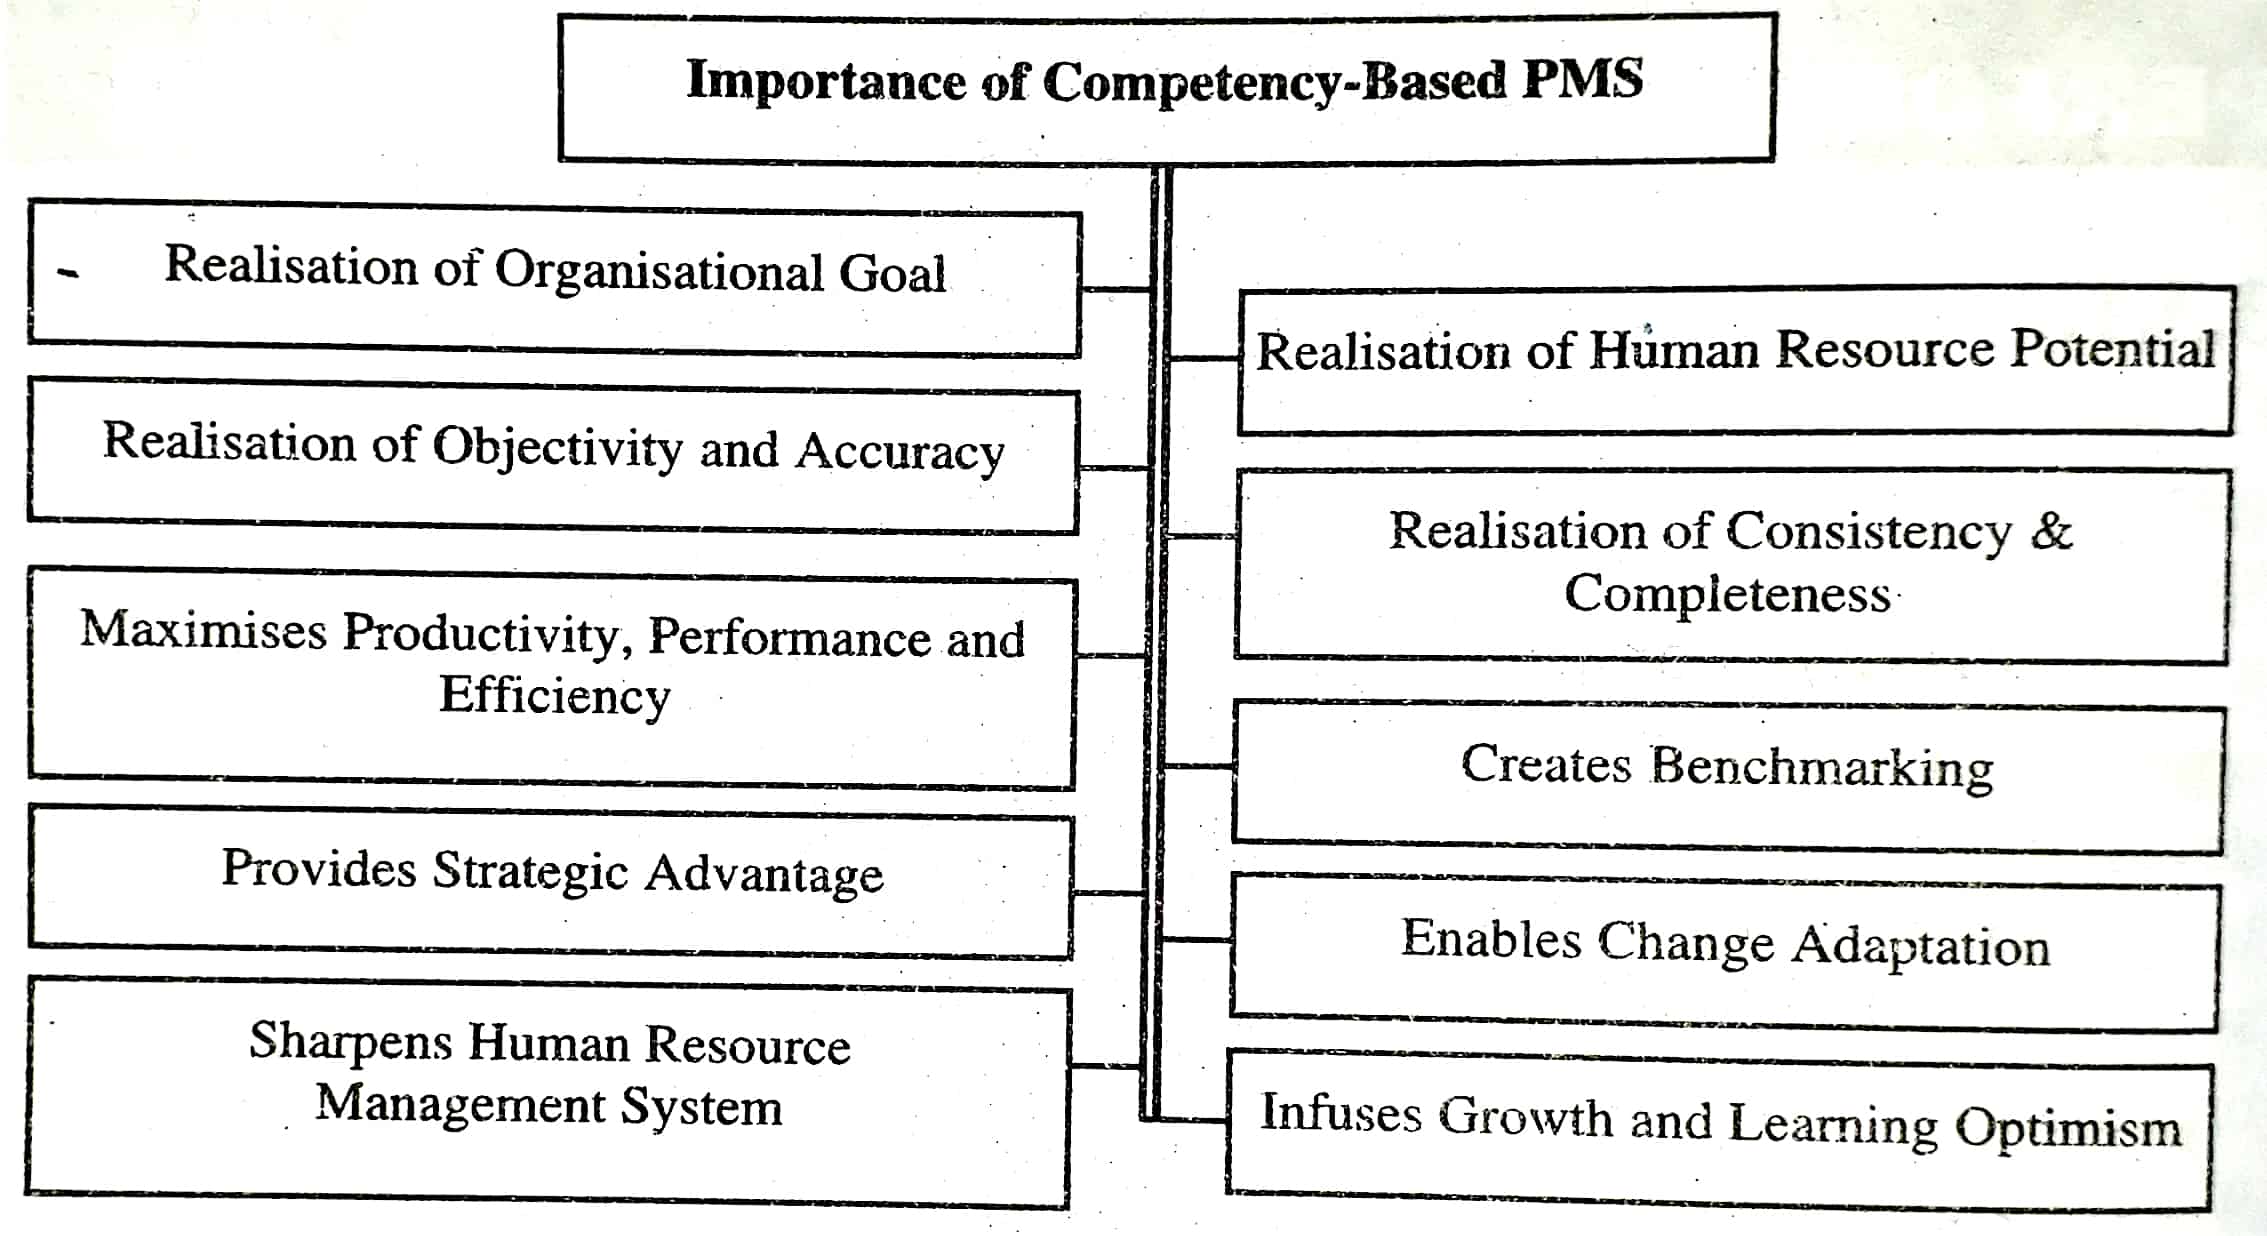 Importance of Competency-Based PMS